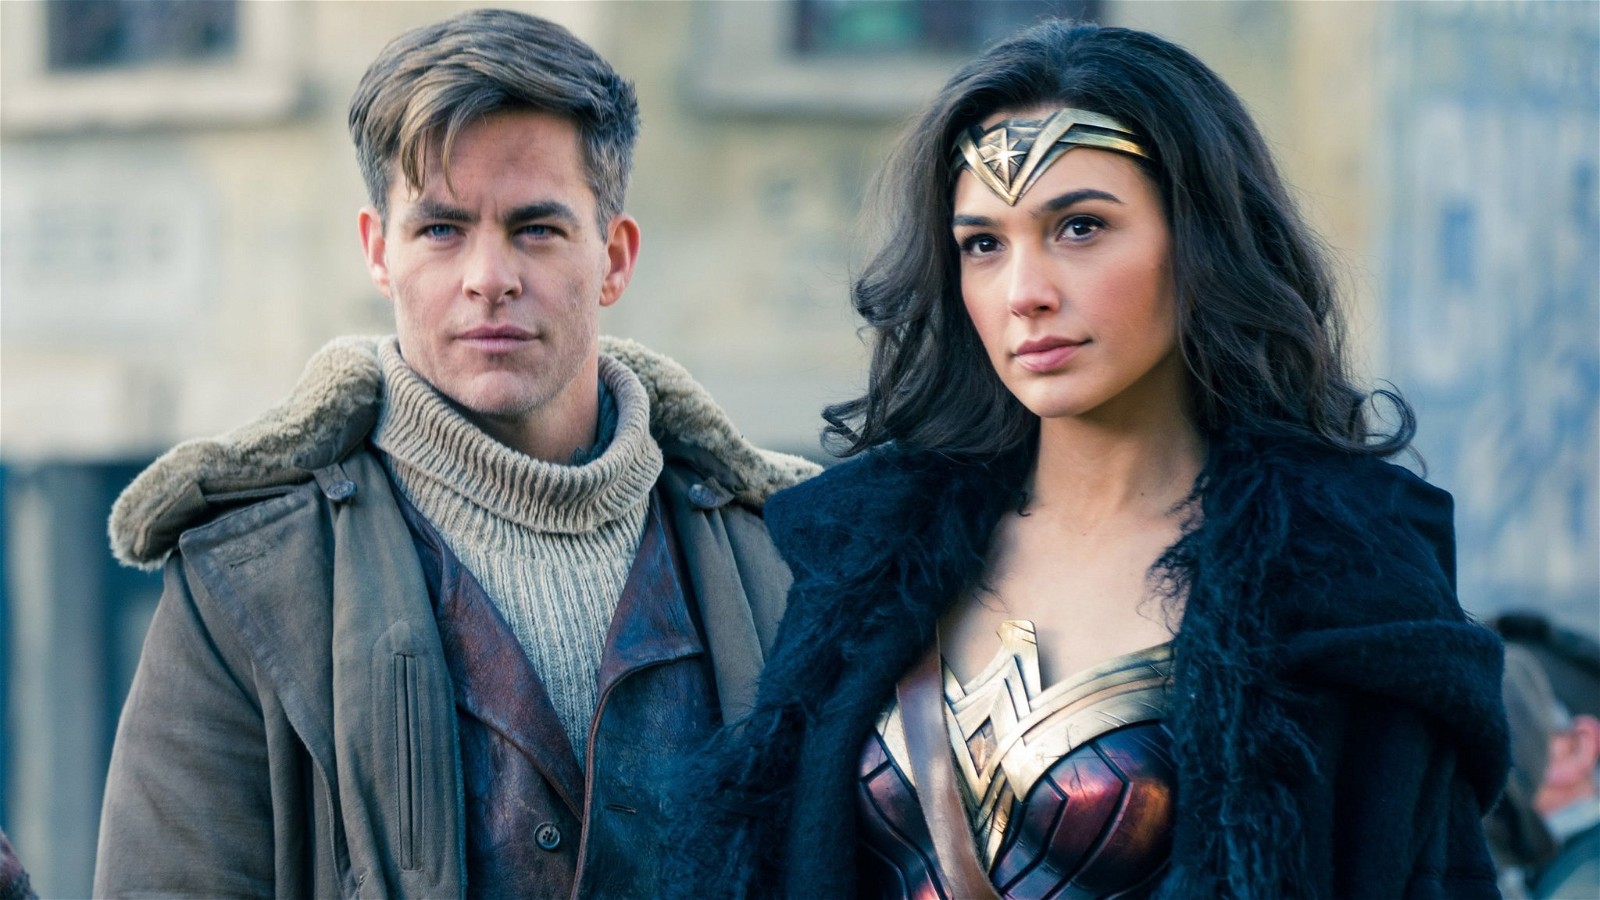 Chris Pine and Gal Gadot in a still from Wonder Woman | Warner Bros.